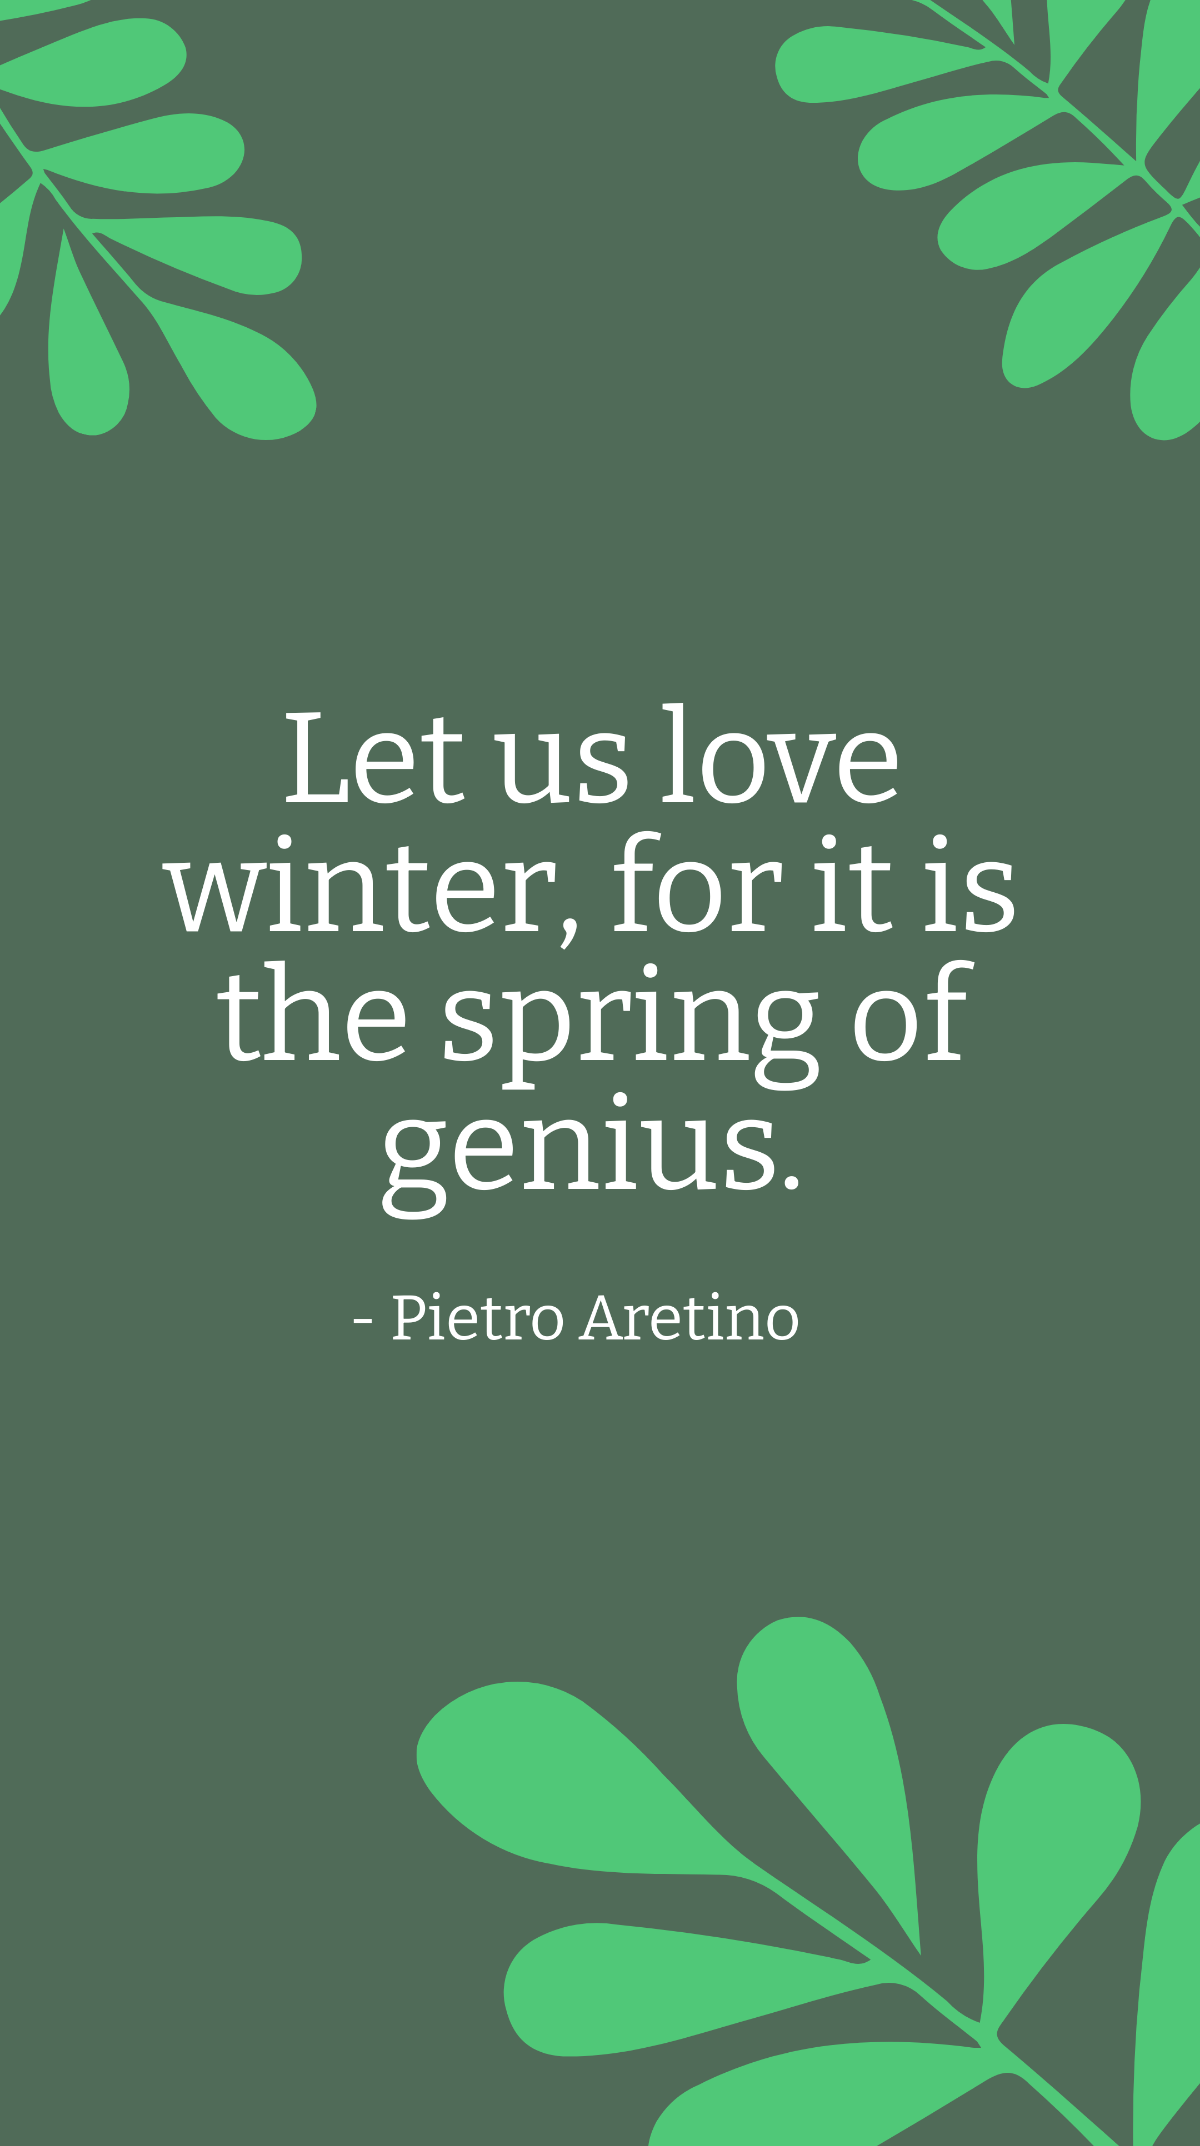 Pietro Aretino - Let us love winter, for it is the spring of genius. Template